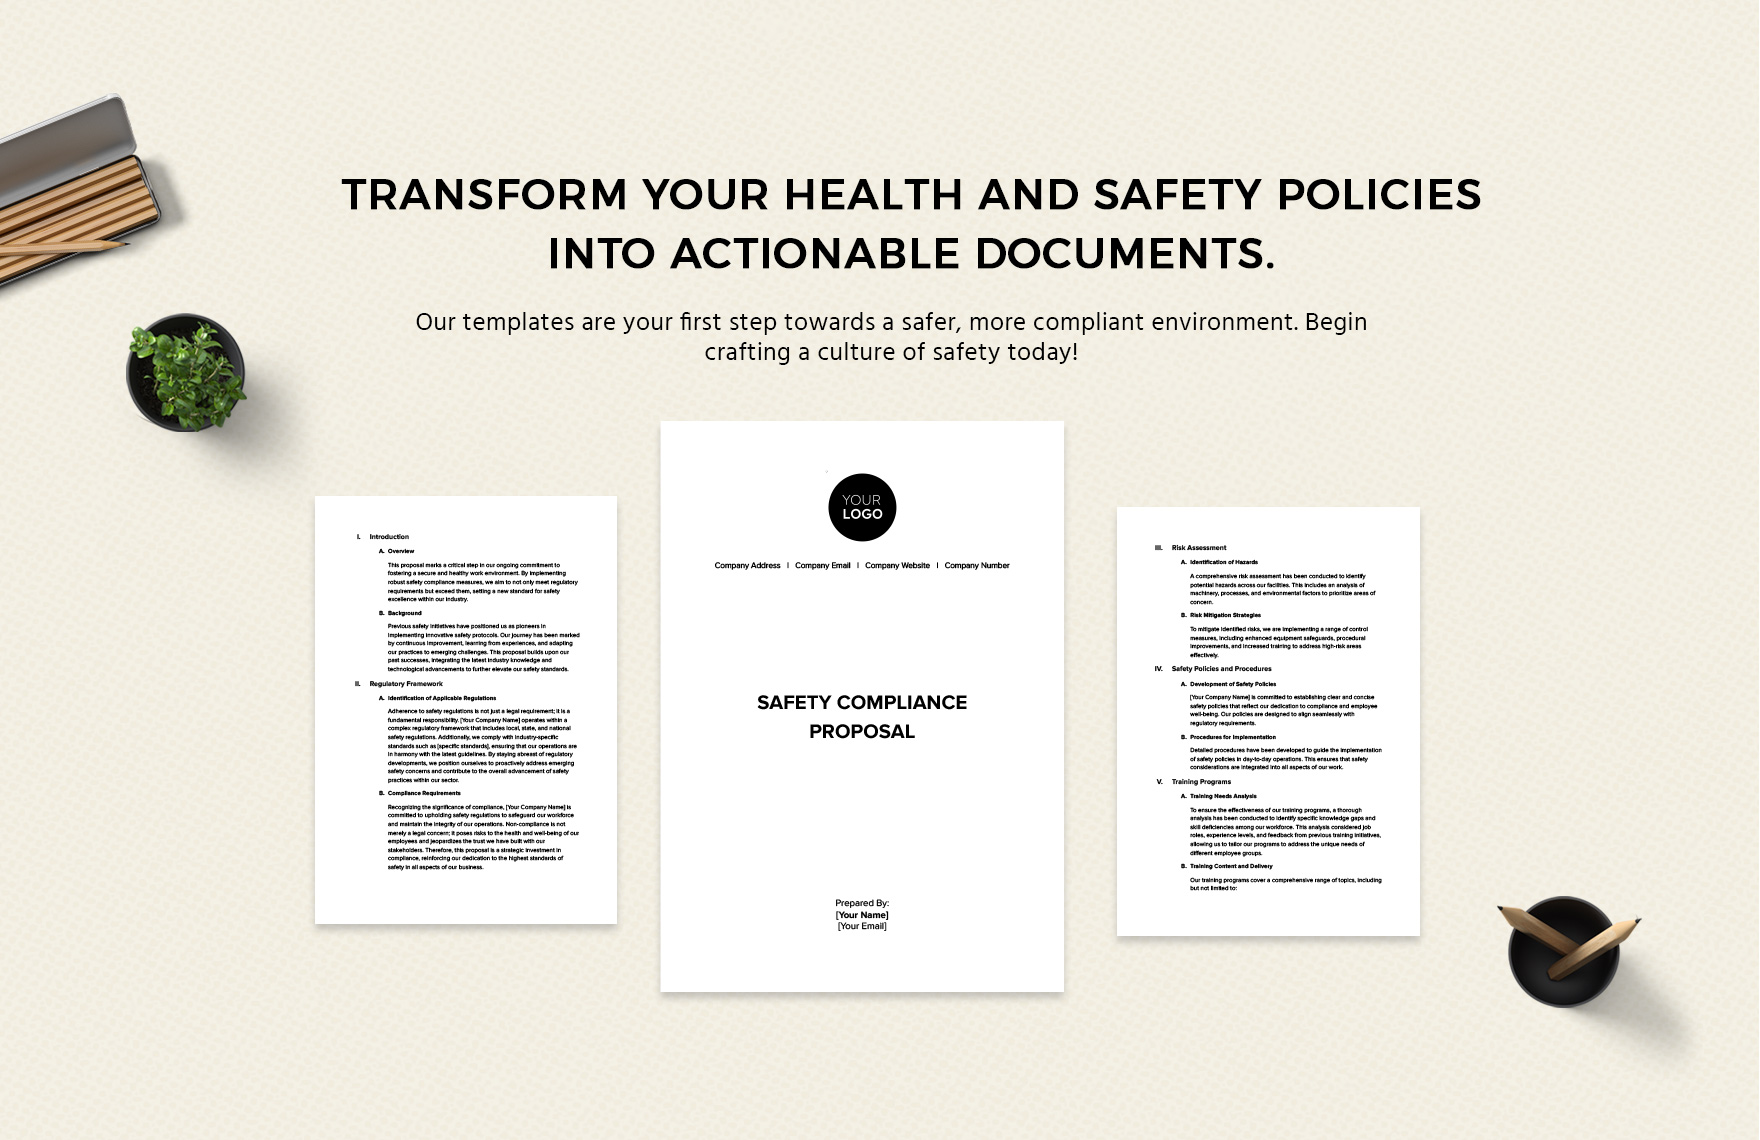 Safety Compliance Proposal Template